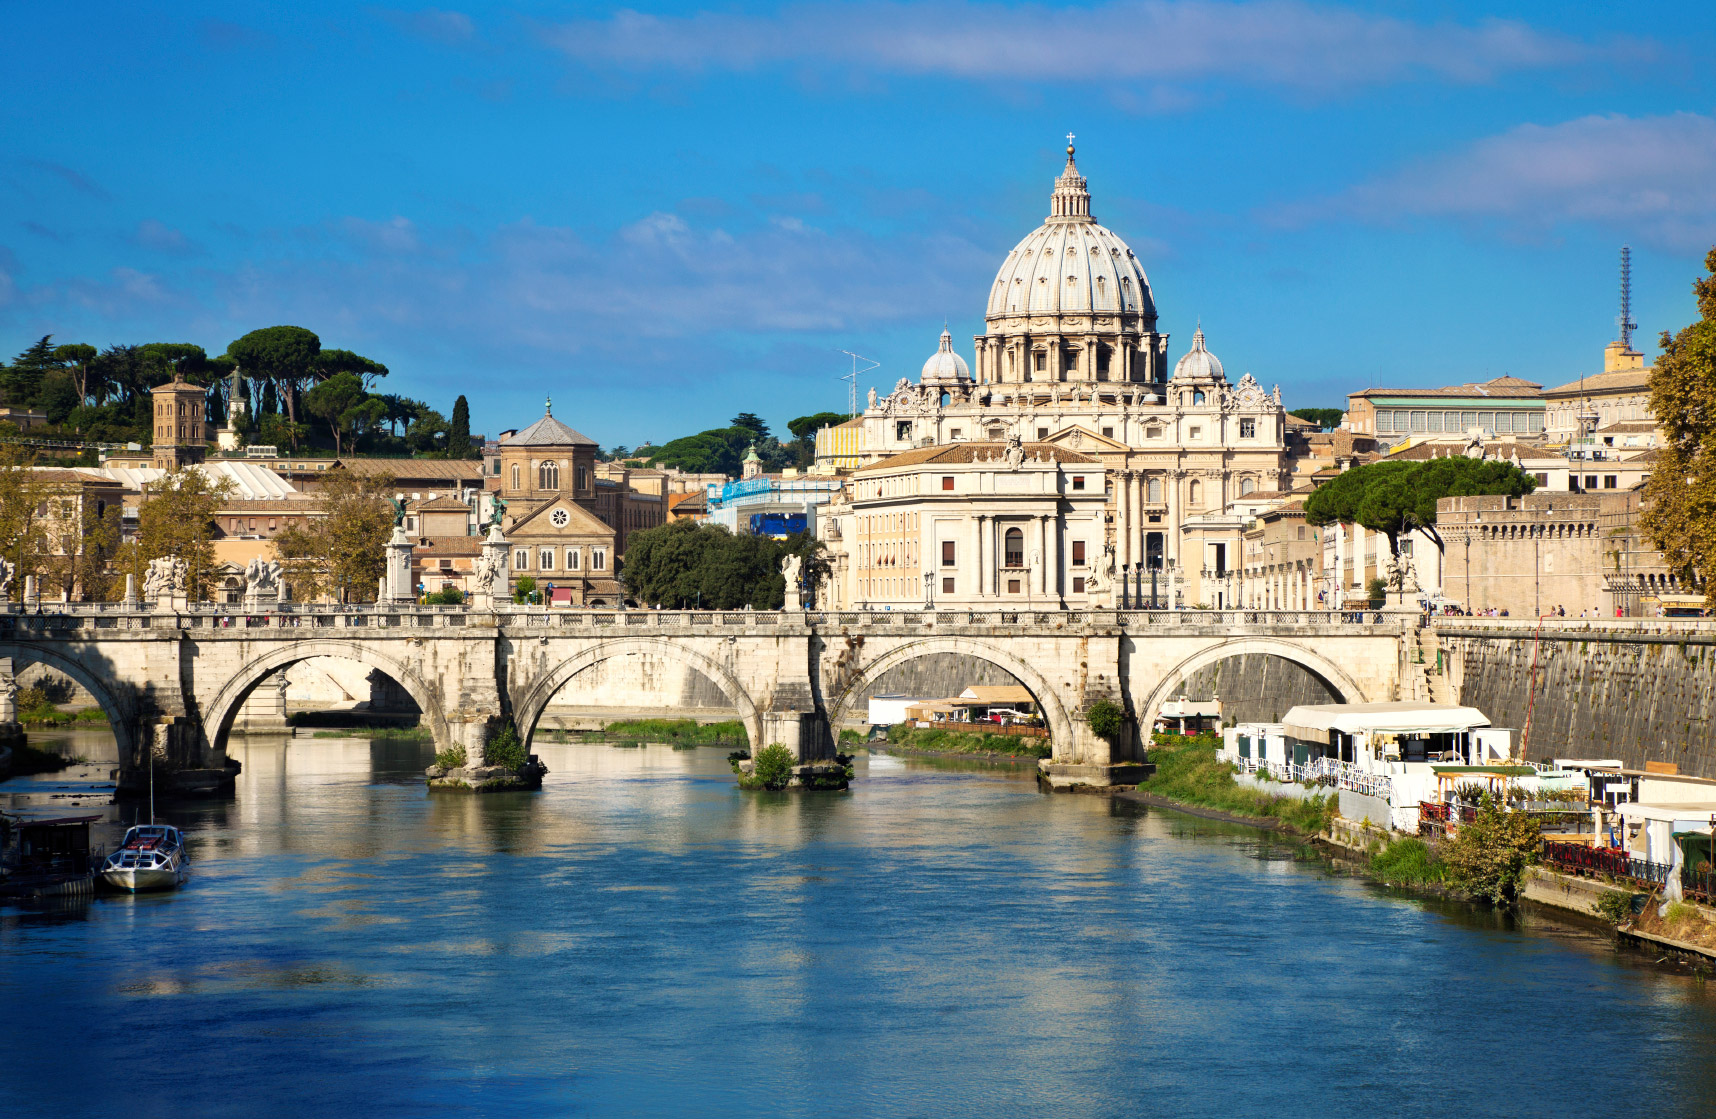 Flight Deal To Rome For As Low As $256 Round-Trip